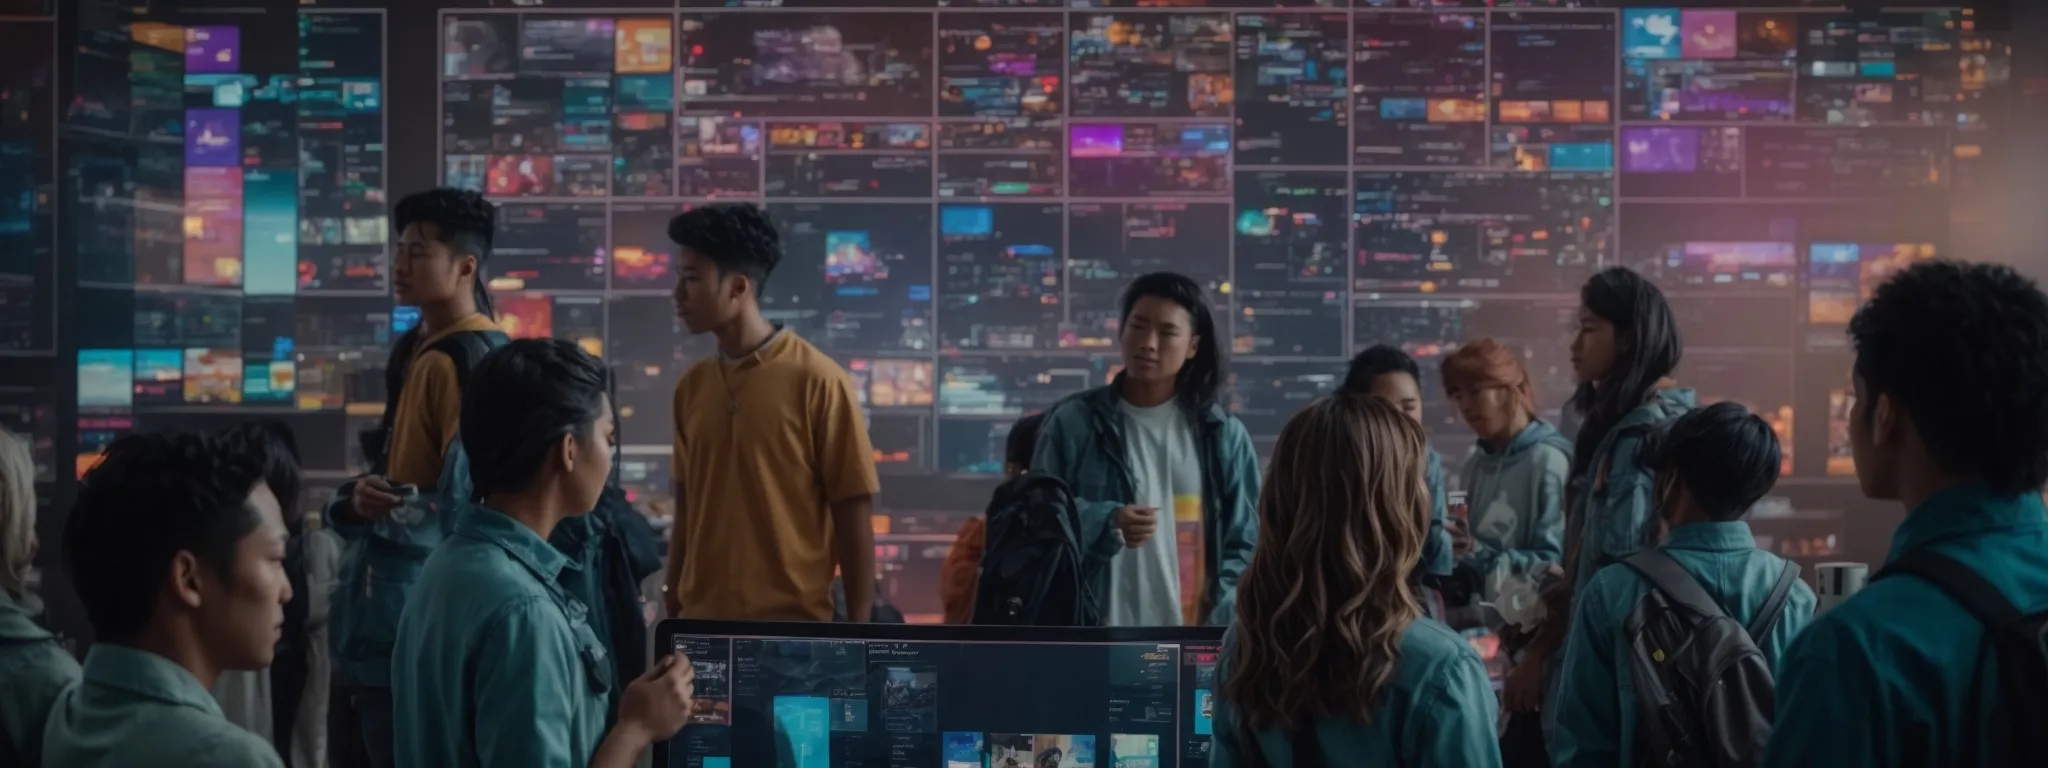 a group of people gathered around a large touchscreen, visibly interacting with an array of colorful social media interfaces.